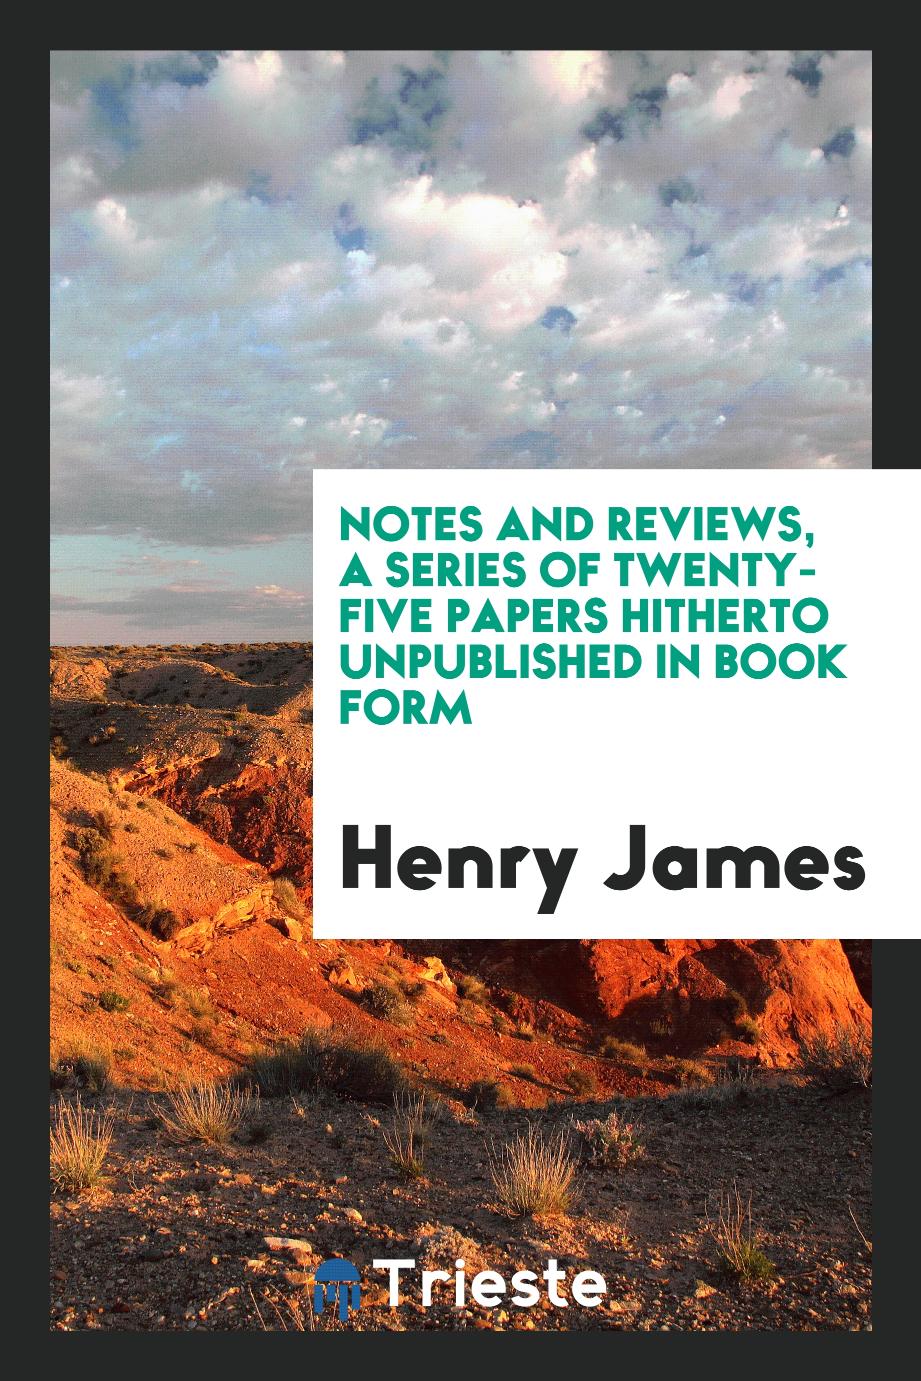 Notes and reviews, a series of twenty-five papers hitherto unpublished in book form